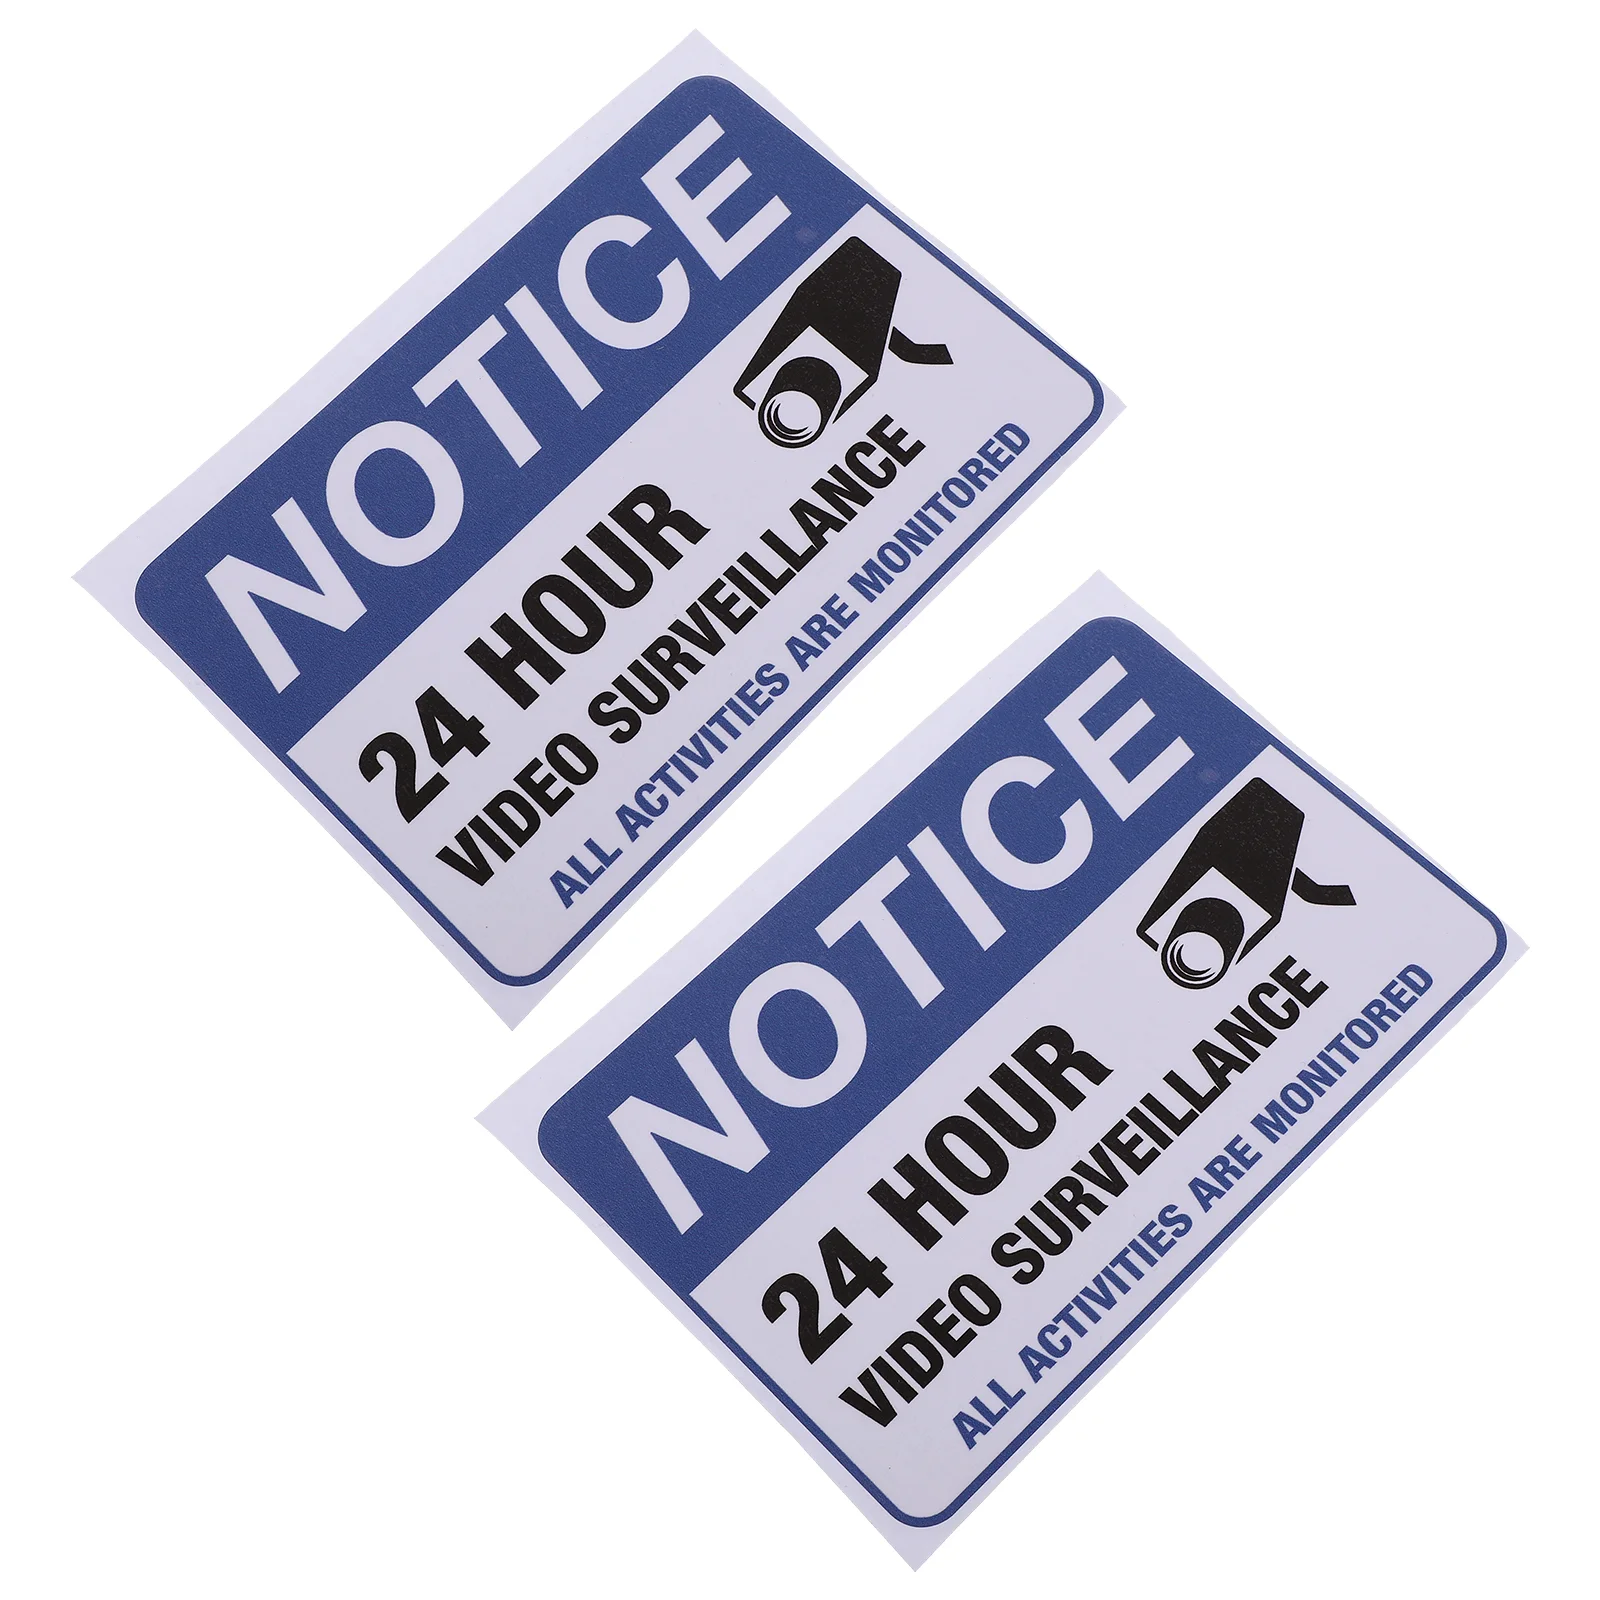 

2 Pcs Monitoring Warning Stickers Color 24h Monitored Car Video Surveillance Adhesive Supplies Decal Caution